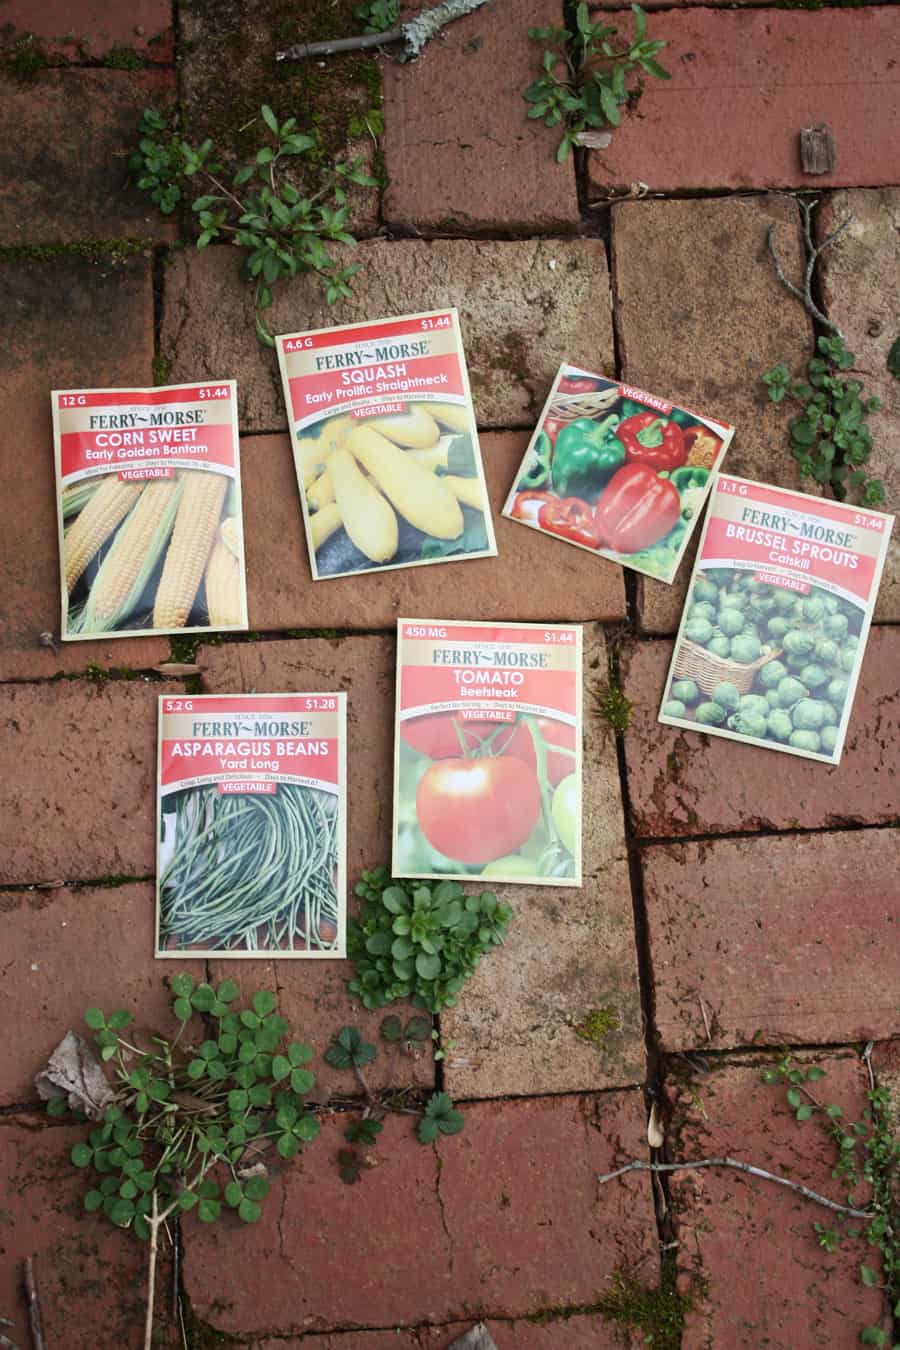 How to start your first vegetable garden: easy step by step instructions with pictures to help you begin eating your very own home grown vegetables! | via Autumn All Along